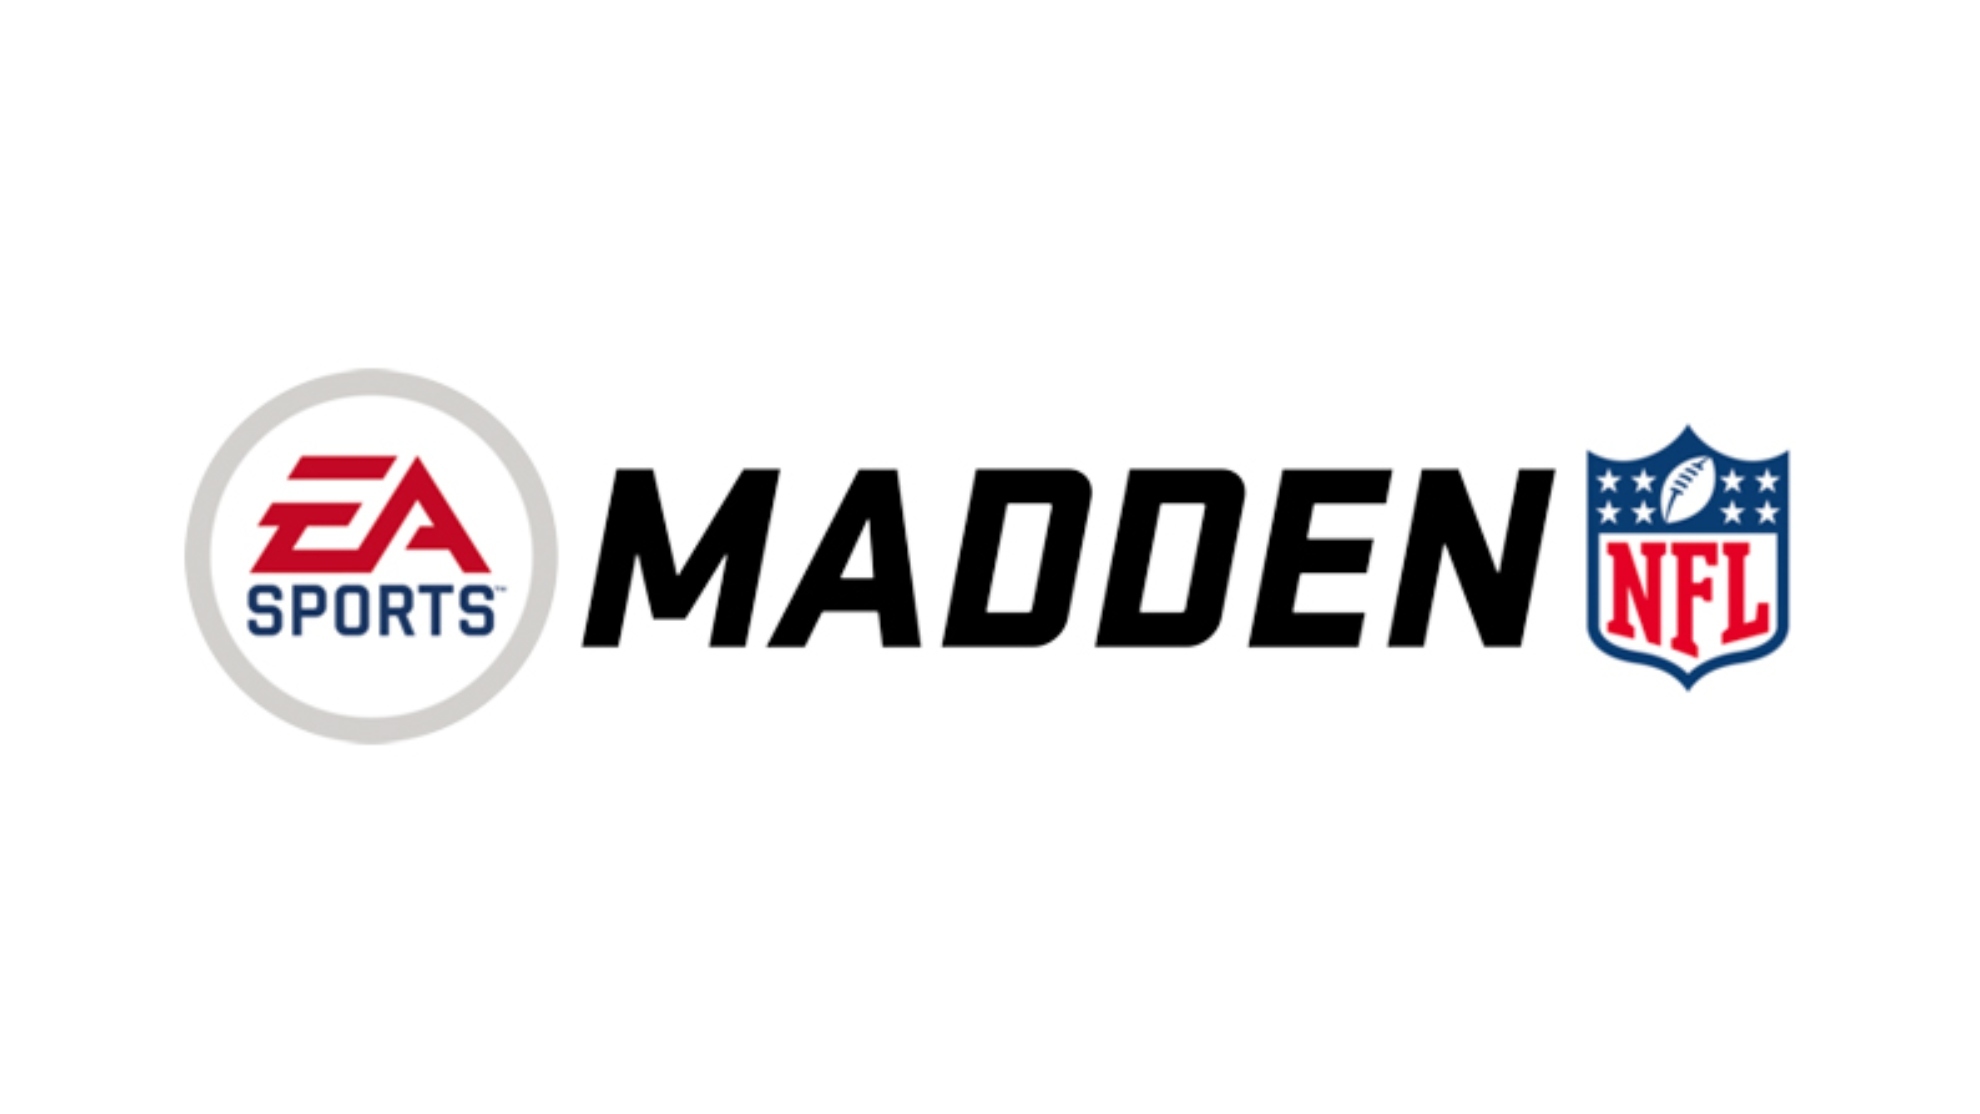 John Madden's videogame legacy with his EA Sports franchise | Marca